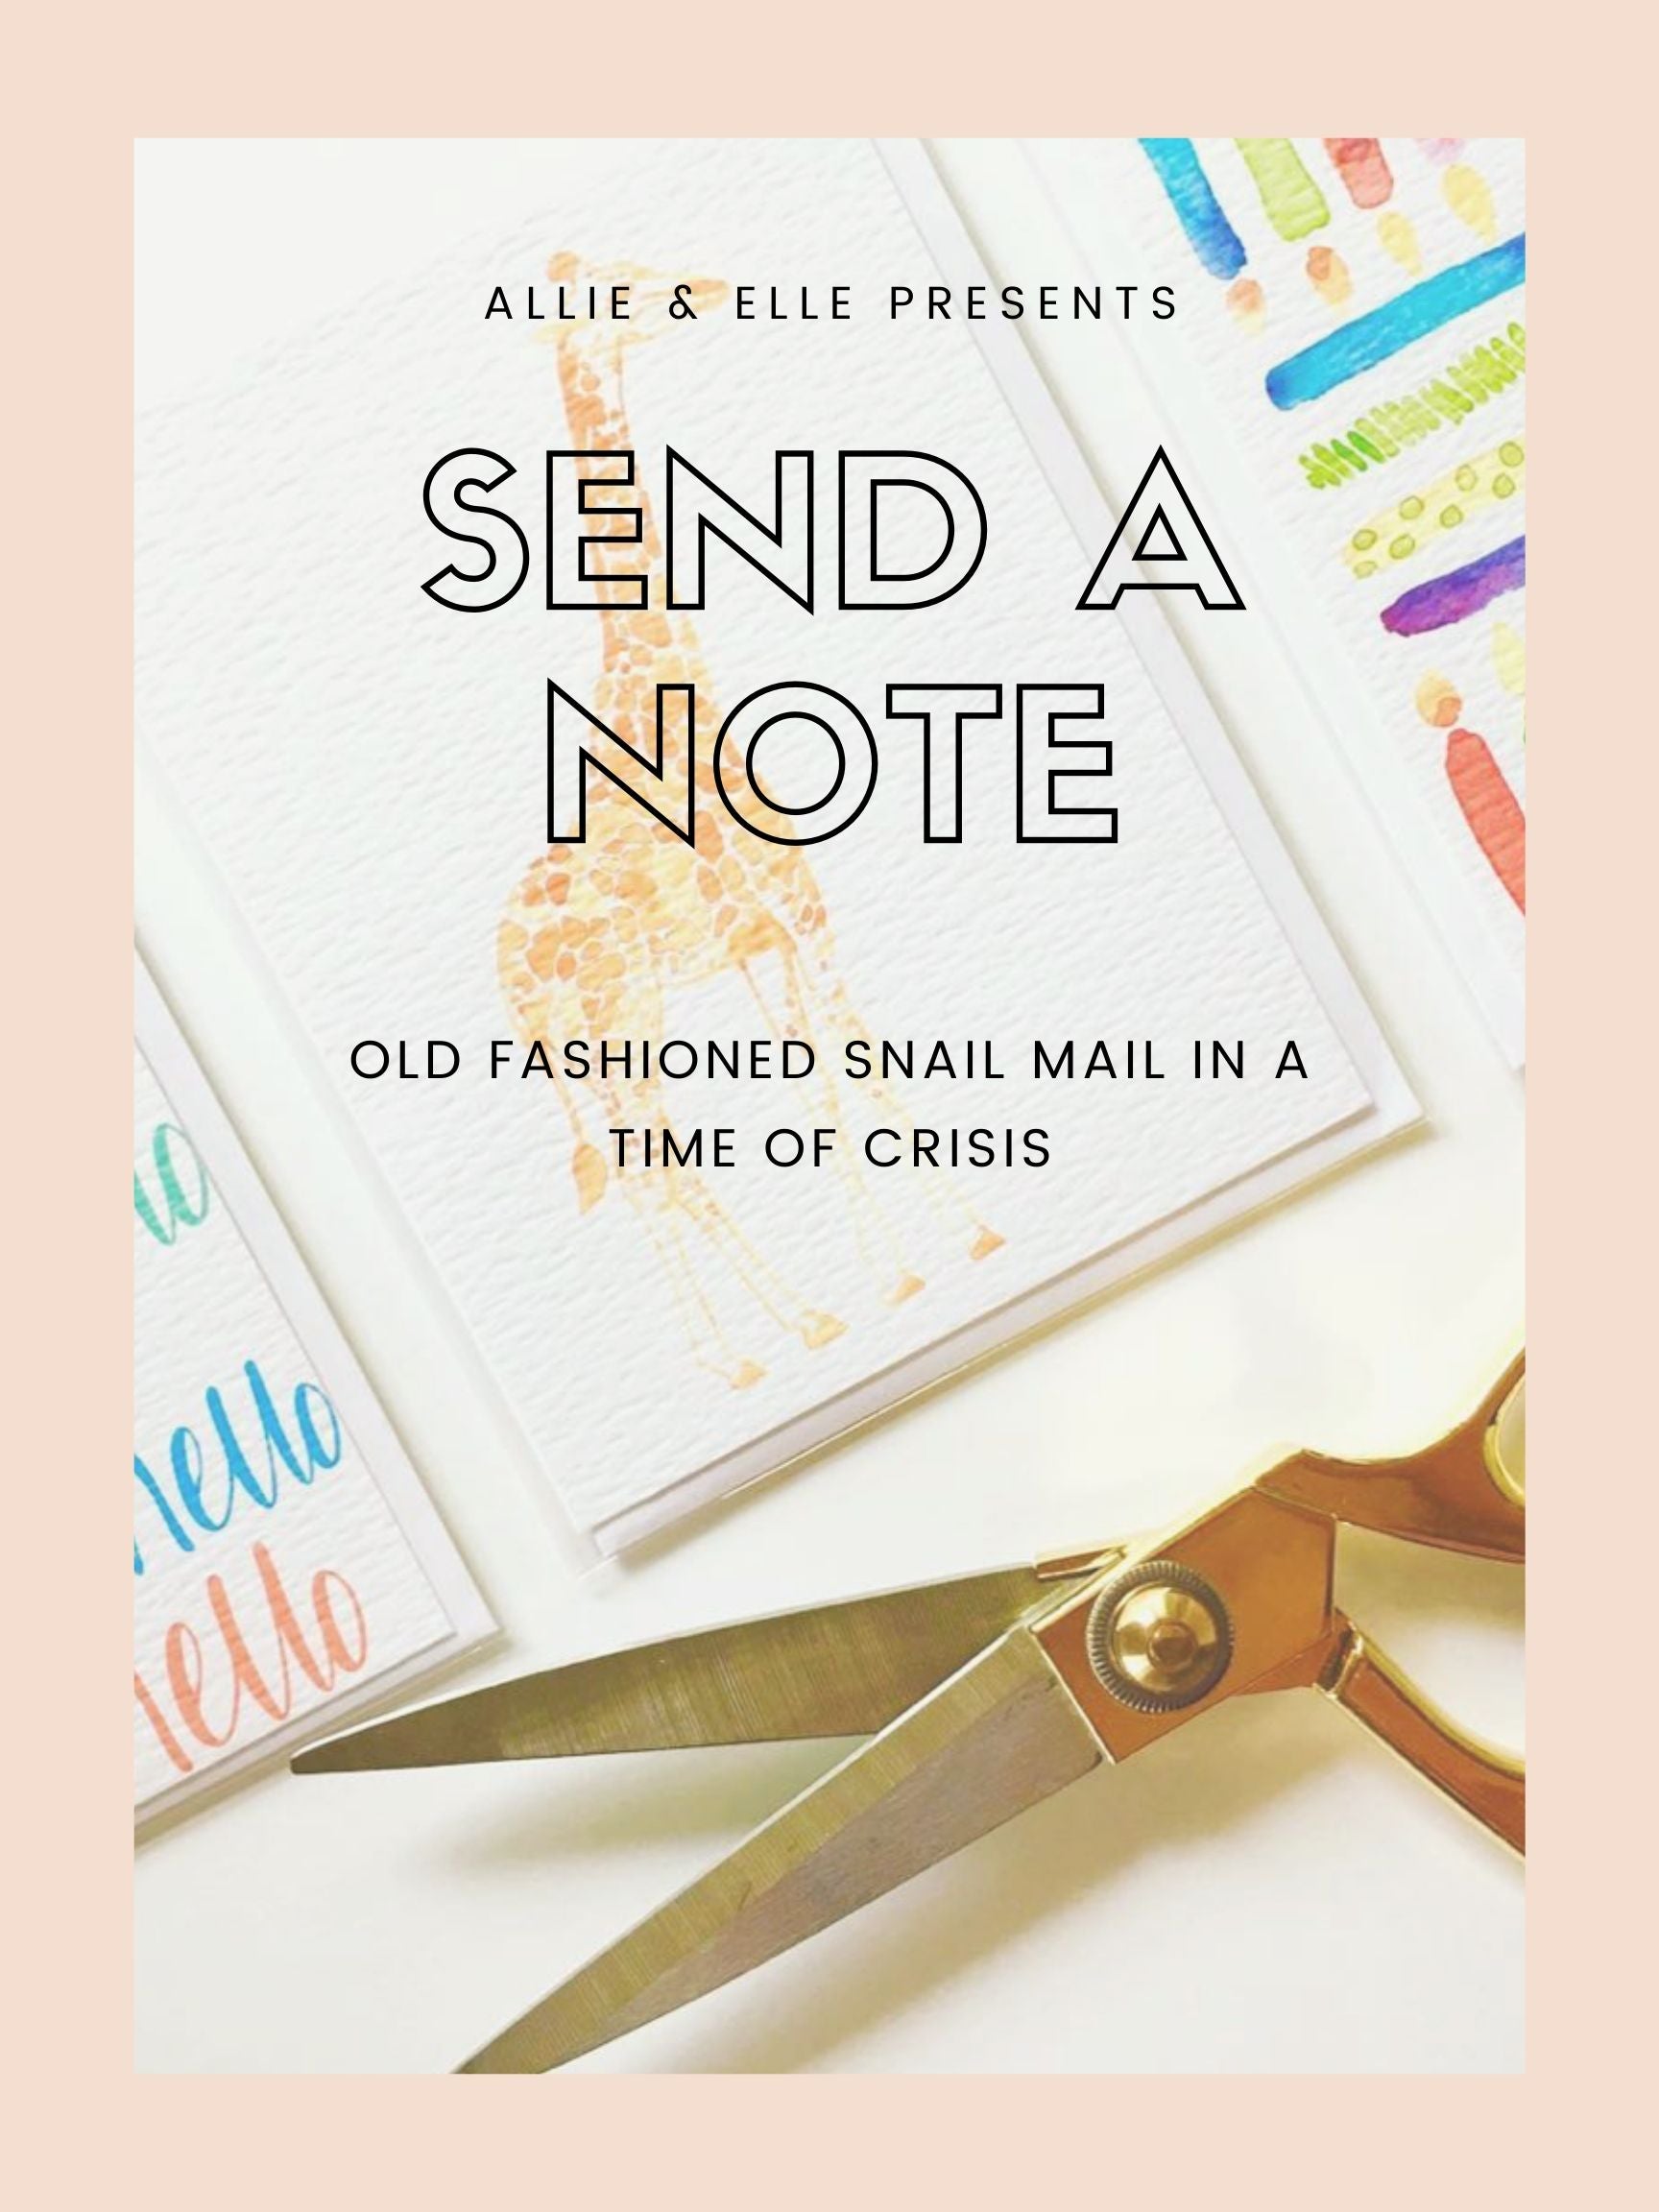 Old fashioned snail mail in a time of crisis